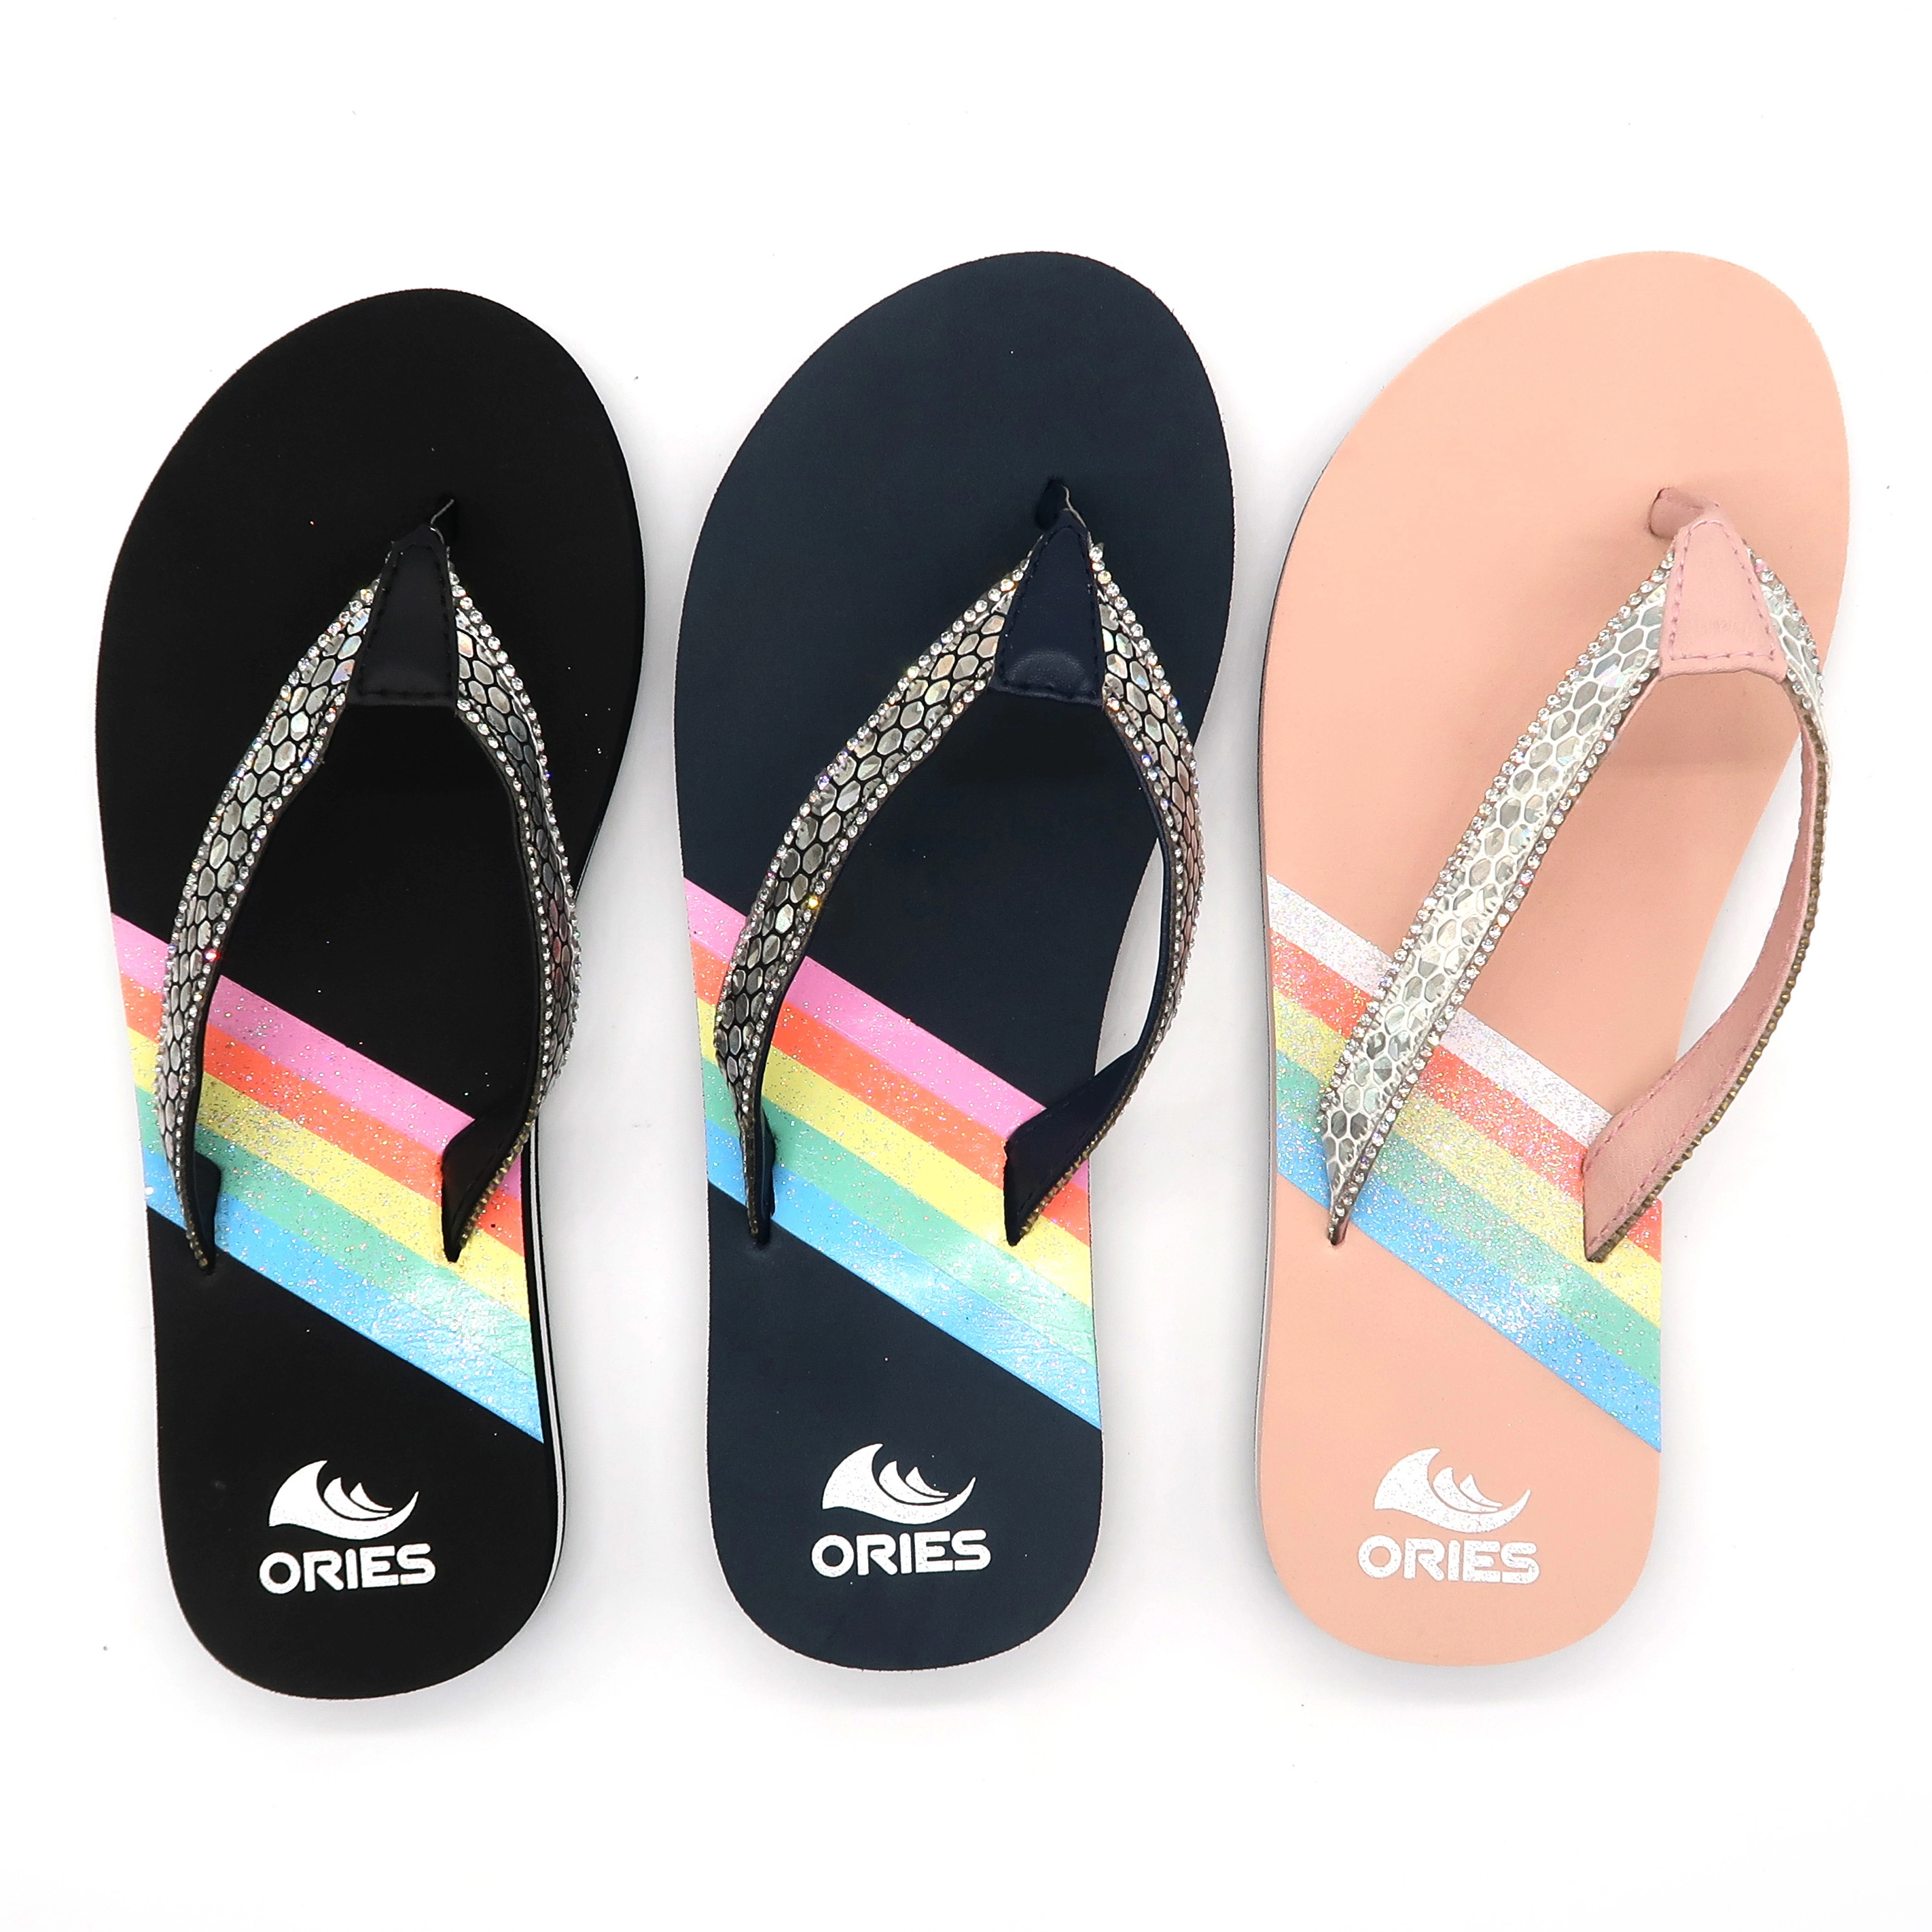 Fashion Silver Accessories comfortable lady slippers outdoor sandals